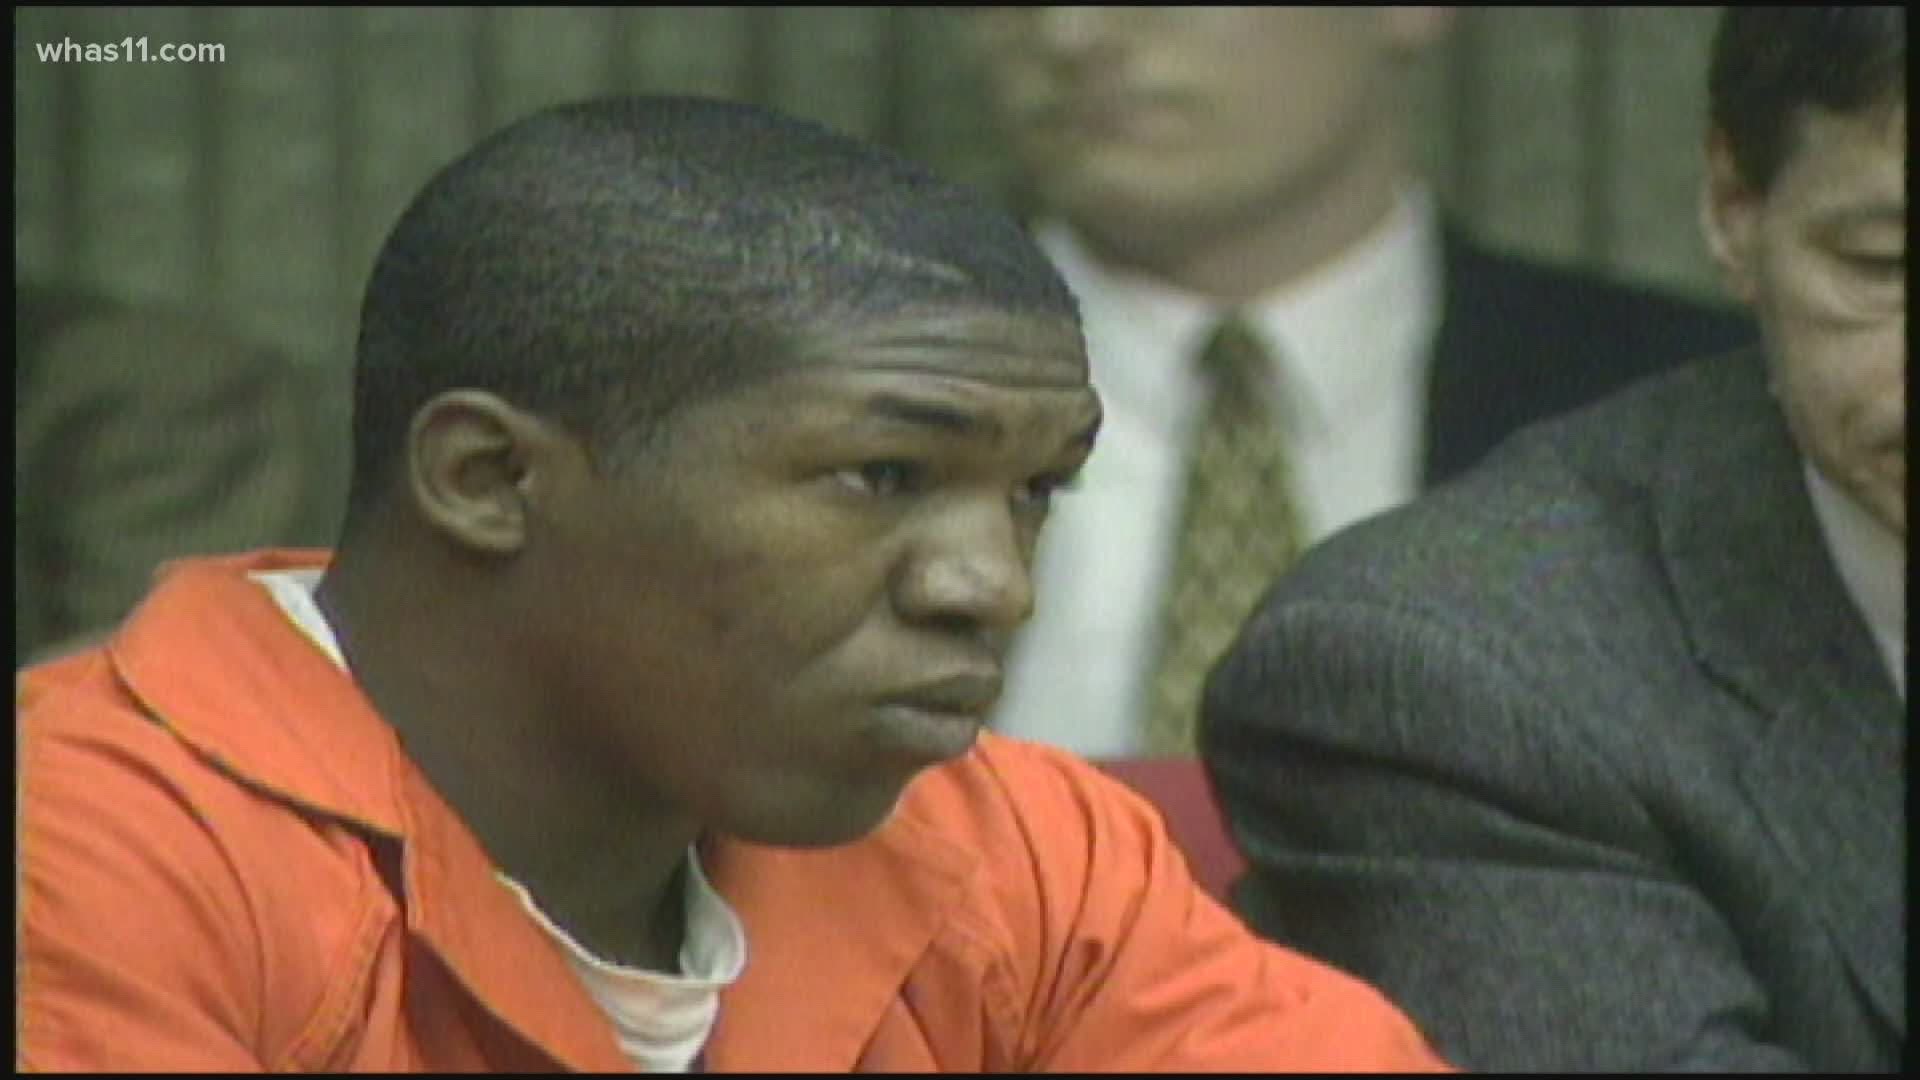 Keith West said evidence in his 1992 case was fabricated by Louisville police, leading to his conviction.